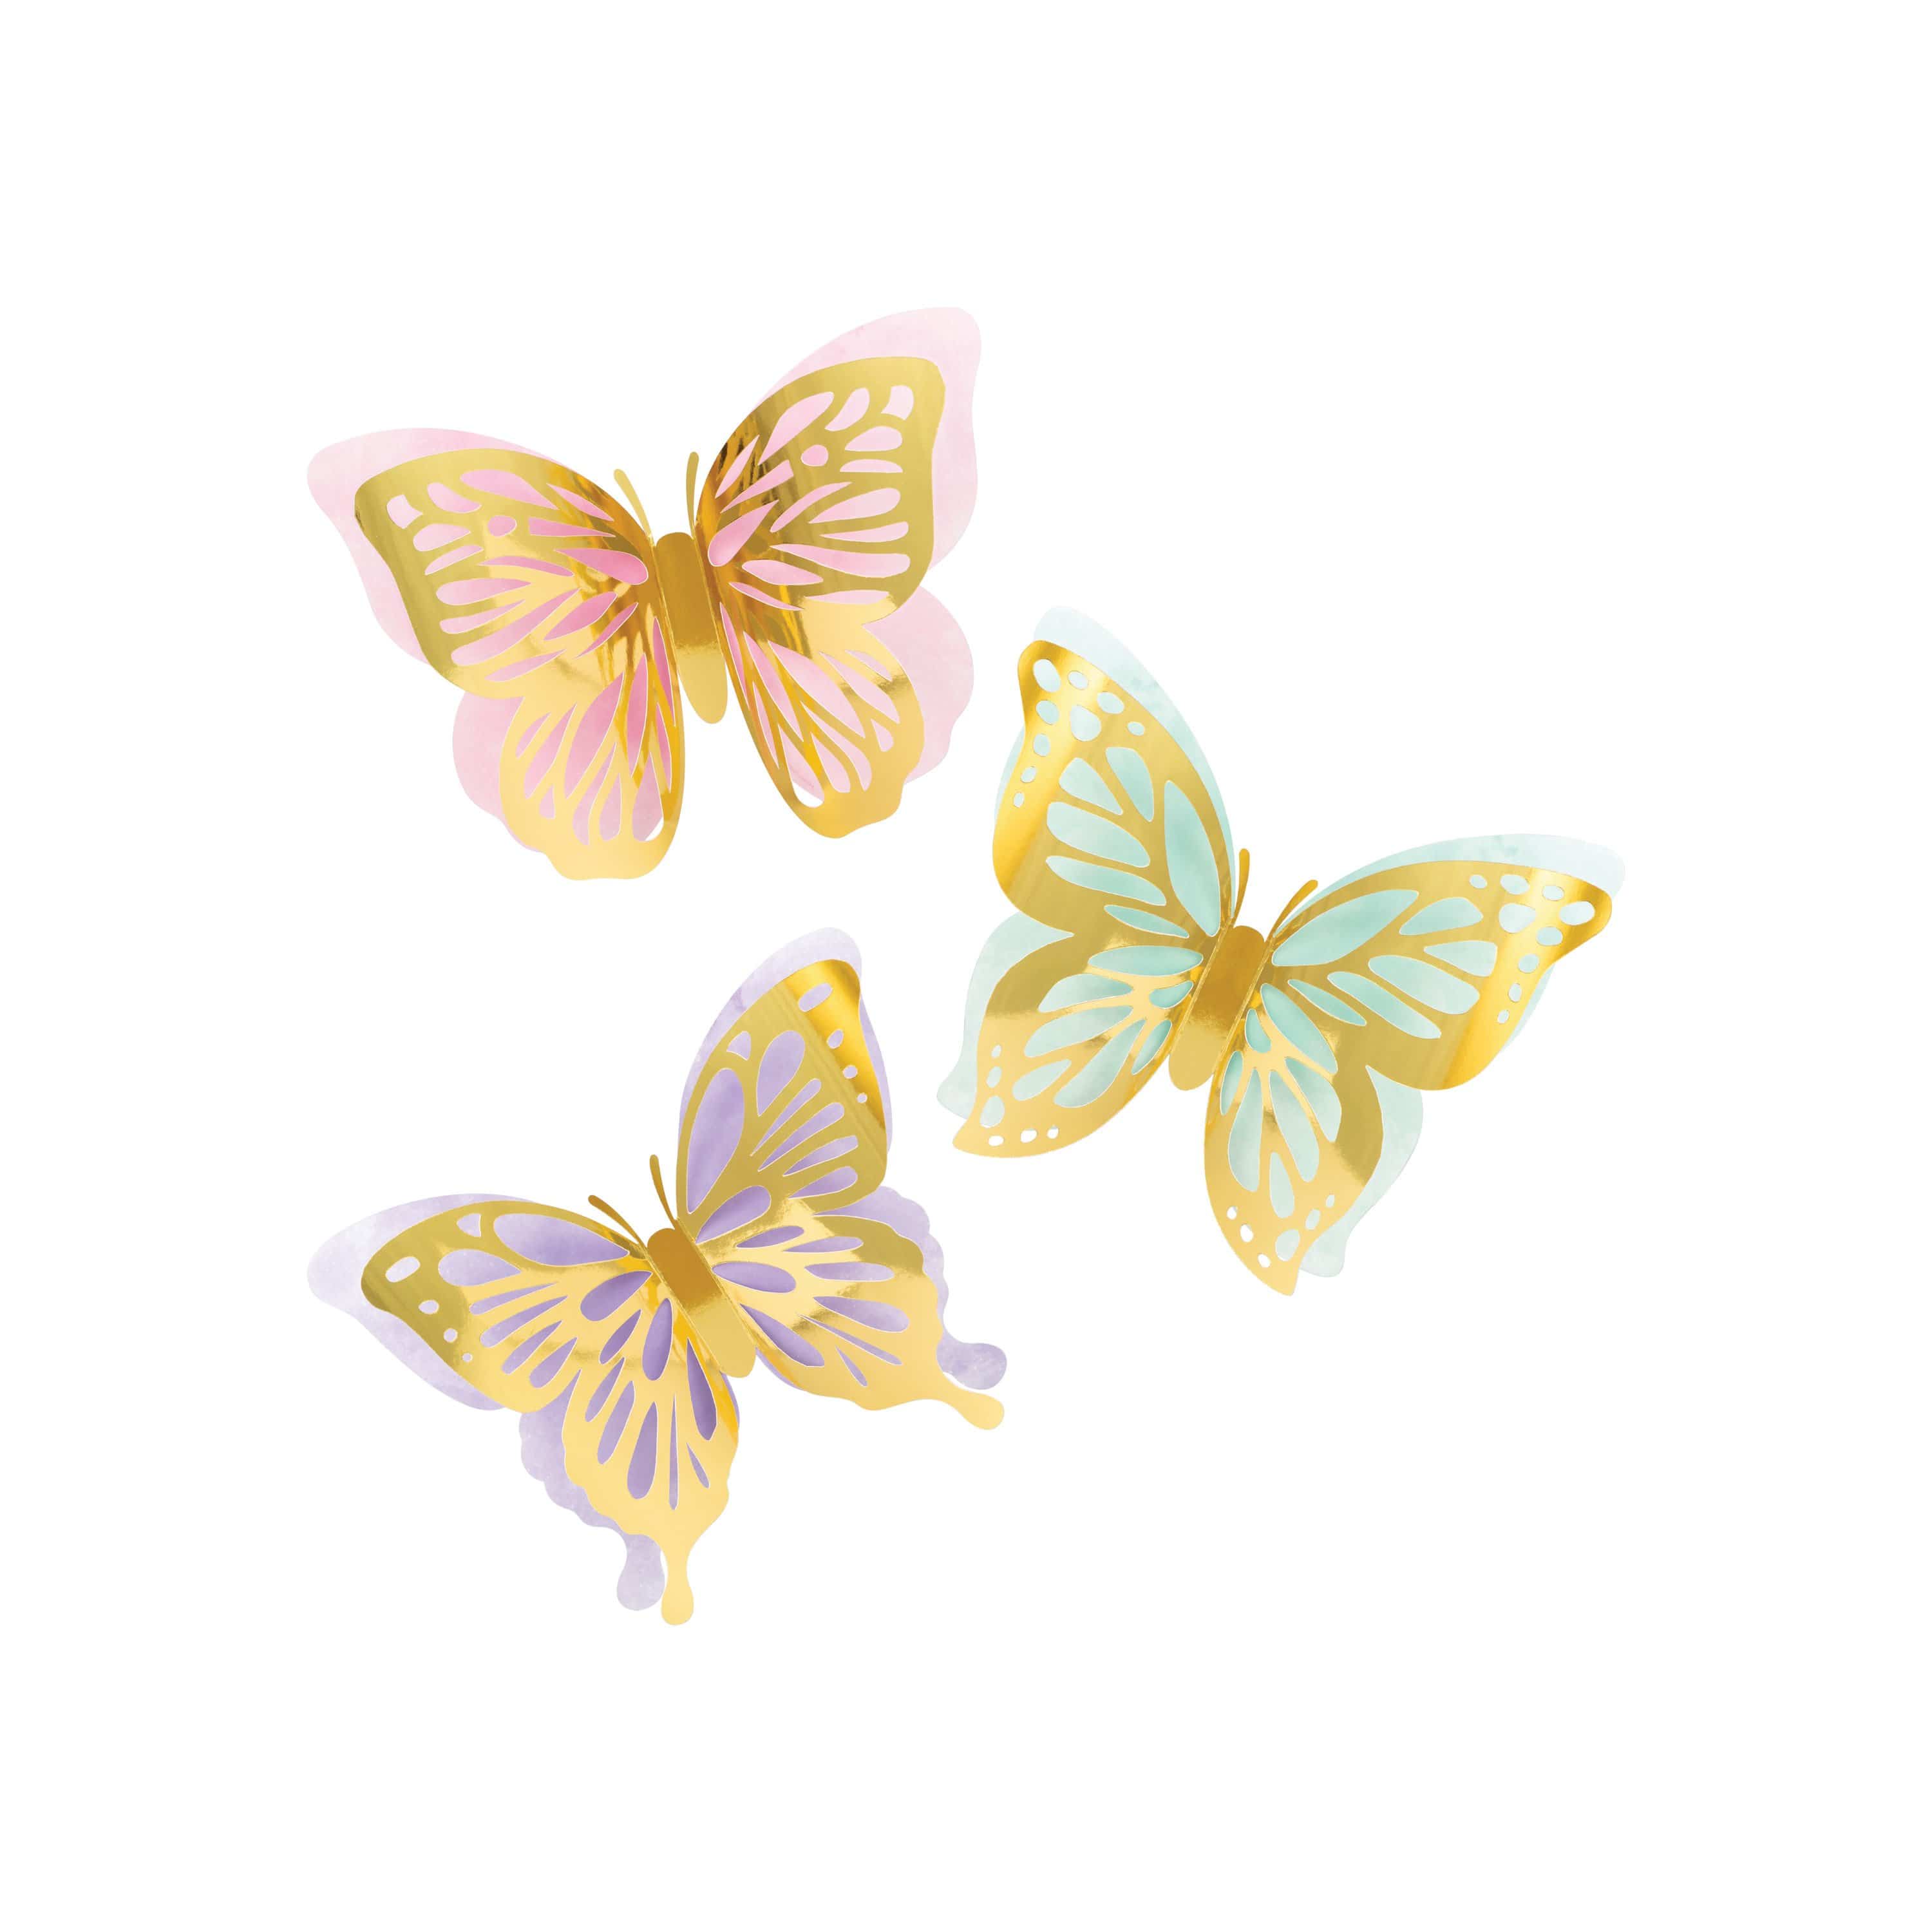 Butterfly Decor, Butterfly Accent